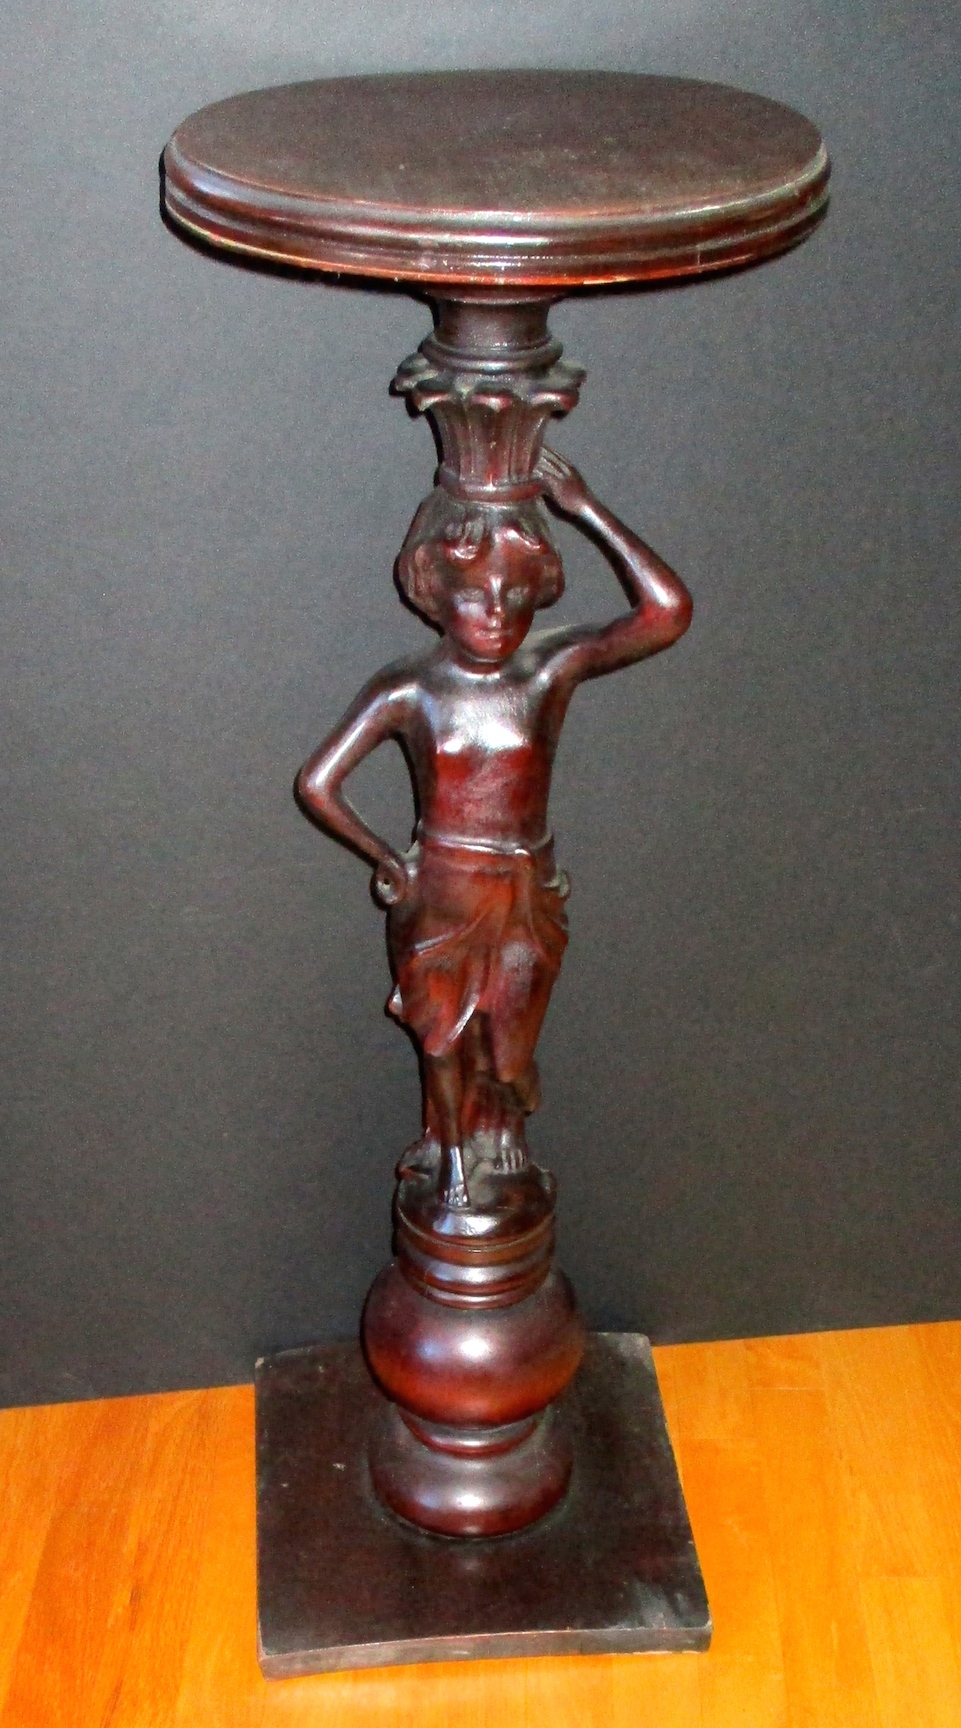 Mahogany Figural Stand on Wood Base (We Can Restore to Customer's Specifications)